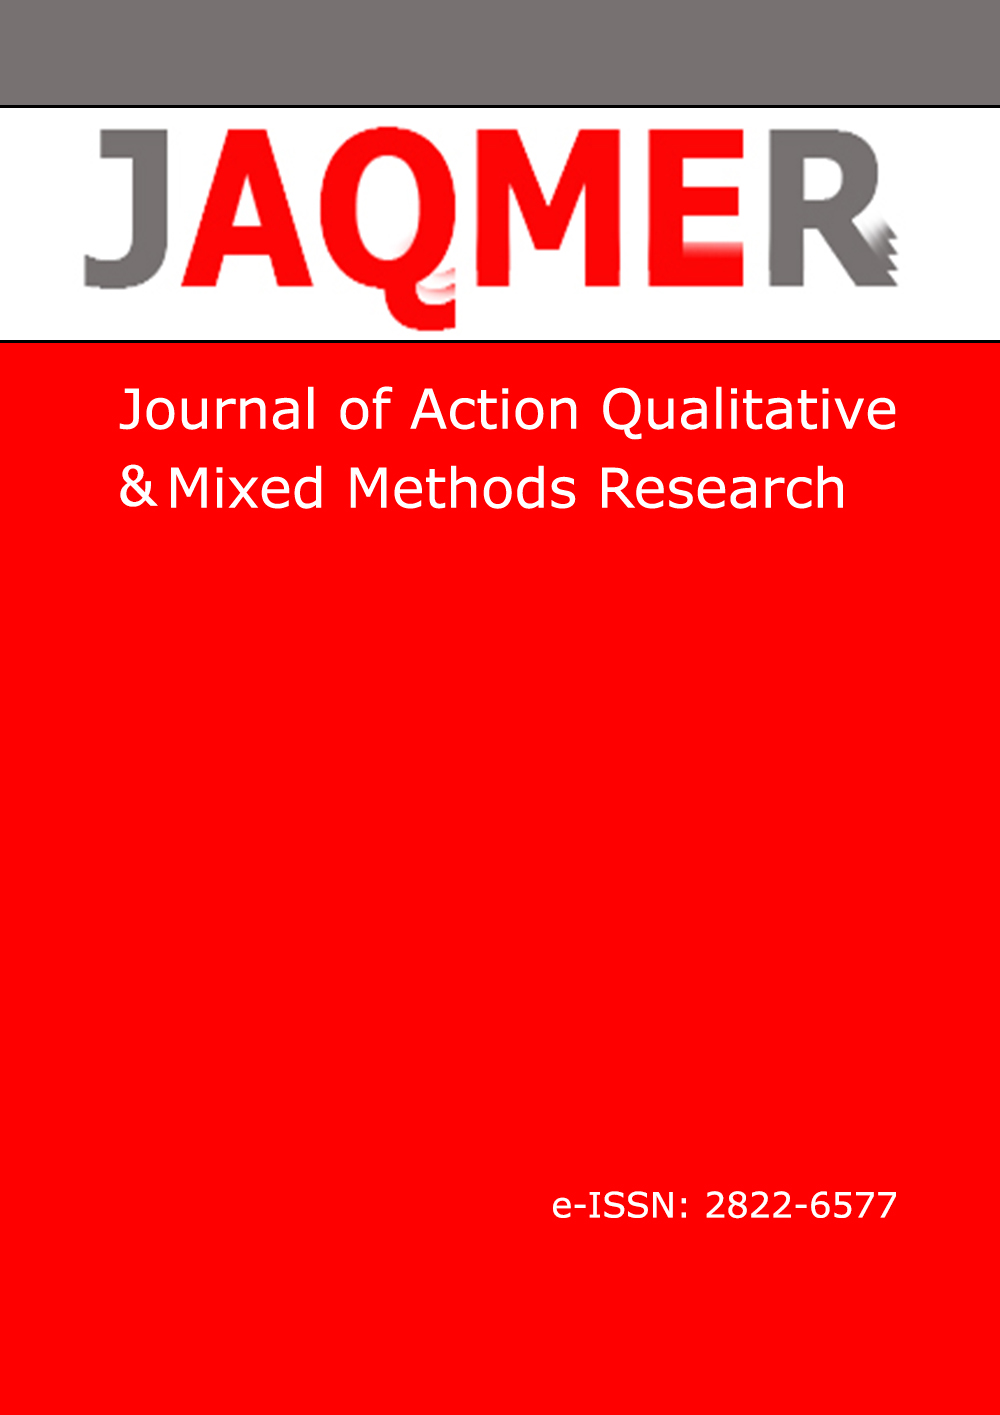 					View Volume 2 Issue 2 (2023): Journal of Action Qualitative & Mixed Methods Research
				